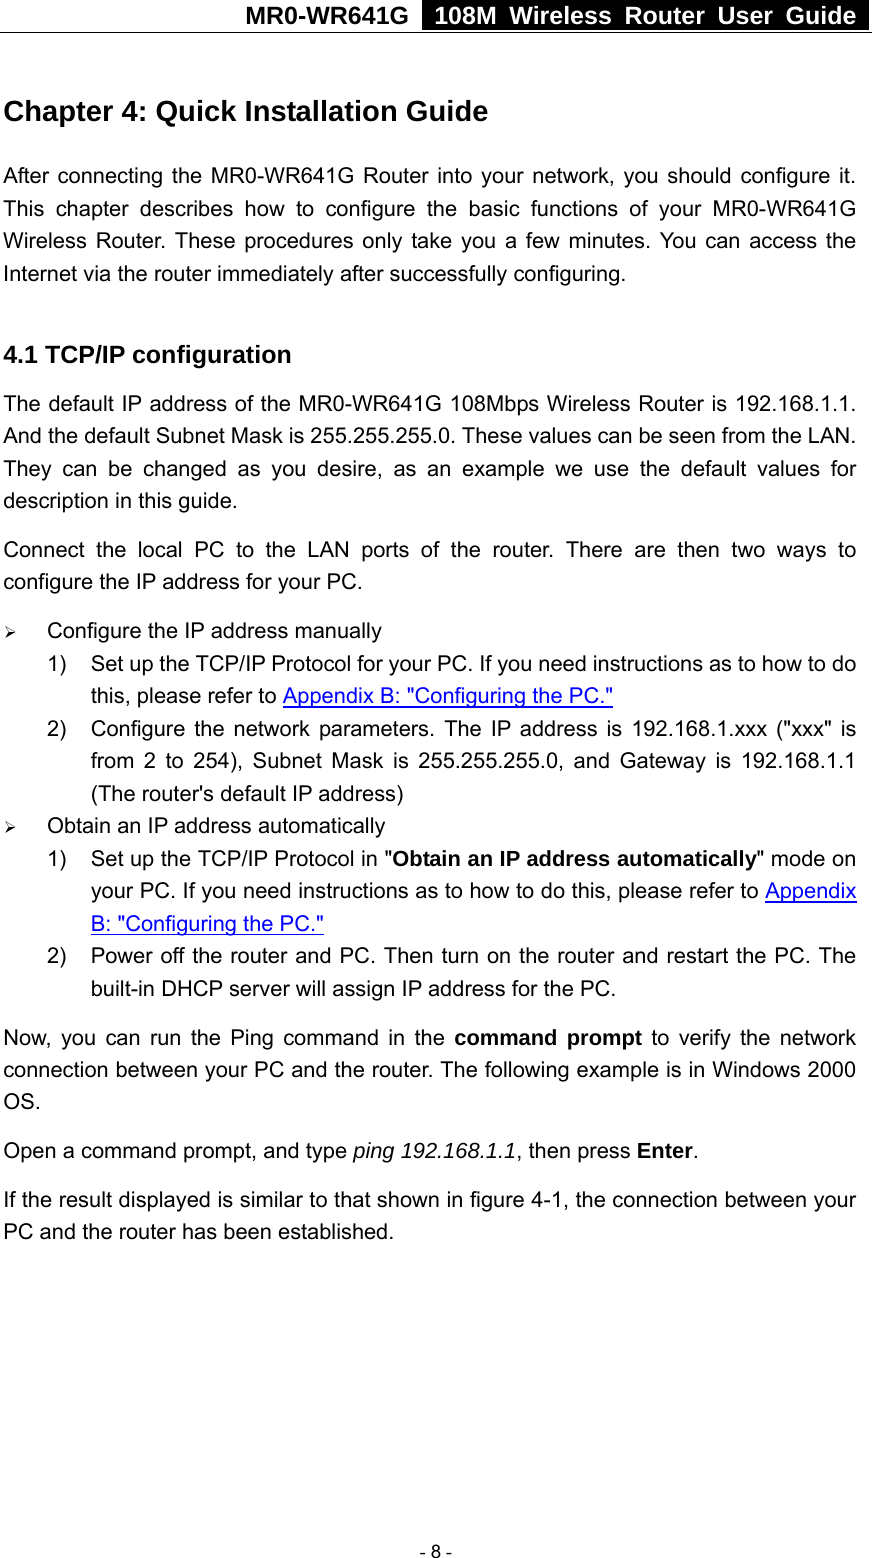 MR0-WR641G   108M Wireless Router User Guide  Chapter 4: Quick Installation Guide After connecting the MR0-WR641G Router into your network, you should configure it. This chapter describes how to configure the basic functions of your MR0-WR641G Wireless Router. These procedures only take you a few minutes. You can access the Internet via the router immediately after successfully configuring.  4.1 TCP/IP configuration The default IP address of the MR0-WR641G 108Mbps Wireless Router is 192.168.1.1. And the default Subnet Mask is 255.255.255.0. These values can be seen from the LAN. They can be changed as you desire, as an example we use the default values for description in this guide. Connect the local PC to the LAN ports of the router. There are then two ways to configure the IP address for your PC. ¾ Configure the IP address manually 1)  Set up the TCP/IP Protocol for your PC. If you need instructions as to how to do this, please refer to Appendix B: &quot;Configuring the PC.&quot; 2)  Configure the network parameters. The IP address is 192.168.1.xxx (&quot;xxx&quot; is from 2 to 254), Subnet Mask is 255.255.255.0, and Gateway is 192.168.1.1 (The router&apos;s default IP address) ¾ Obtain an IP address automatically 1)  Set up the TCP/IP Protocol in &quot;Obtain an IP address automatically&quot; mode on your PC. If you need instructions as to how to do this, please refer to Appendix B: &quot;Configuring the PC.&quot; 2)  Power off the router and PC. Then turn on the router and restart the PC. The built-in DHCP server will assign IP address for the PC. Now, you can run the Ping command in the command prompt to verify the network connection between your PC and the router. The following example is in Windows 2000 OS. Open a command prompt, and type ping 192.168.1.1, then press Enter. If the result displayed is similar to that shown in figure 4-1, the connection between your PC and the router has been established.    - 8 - 